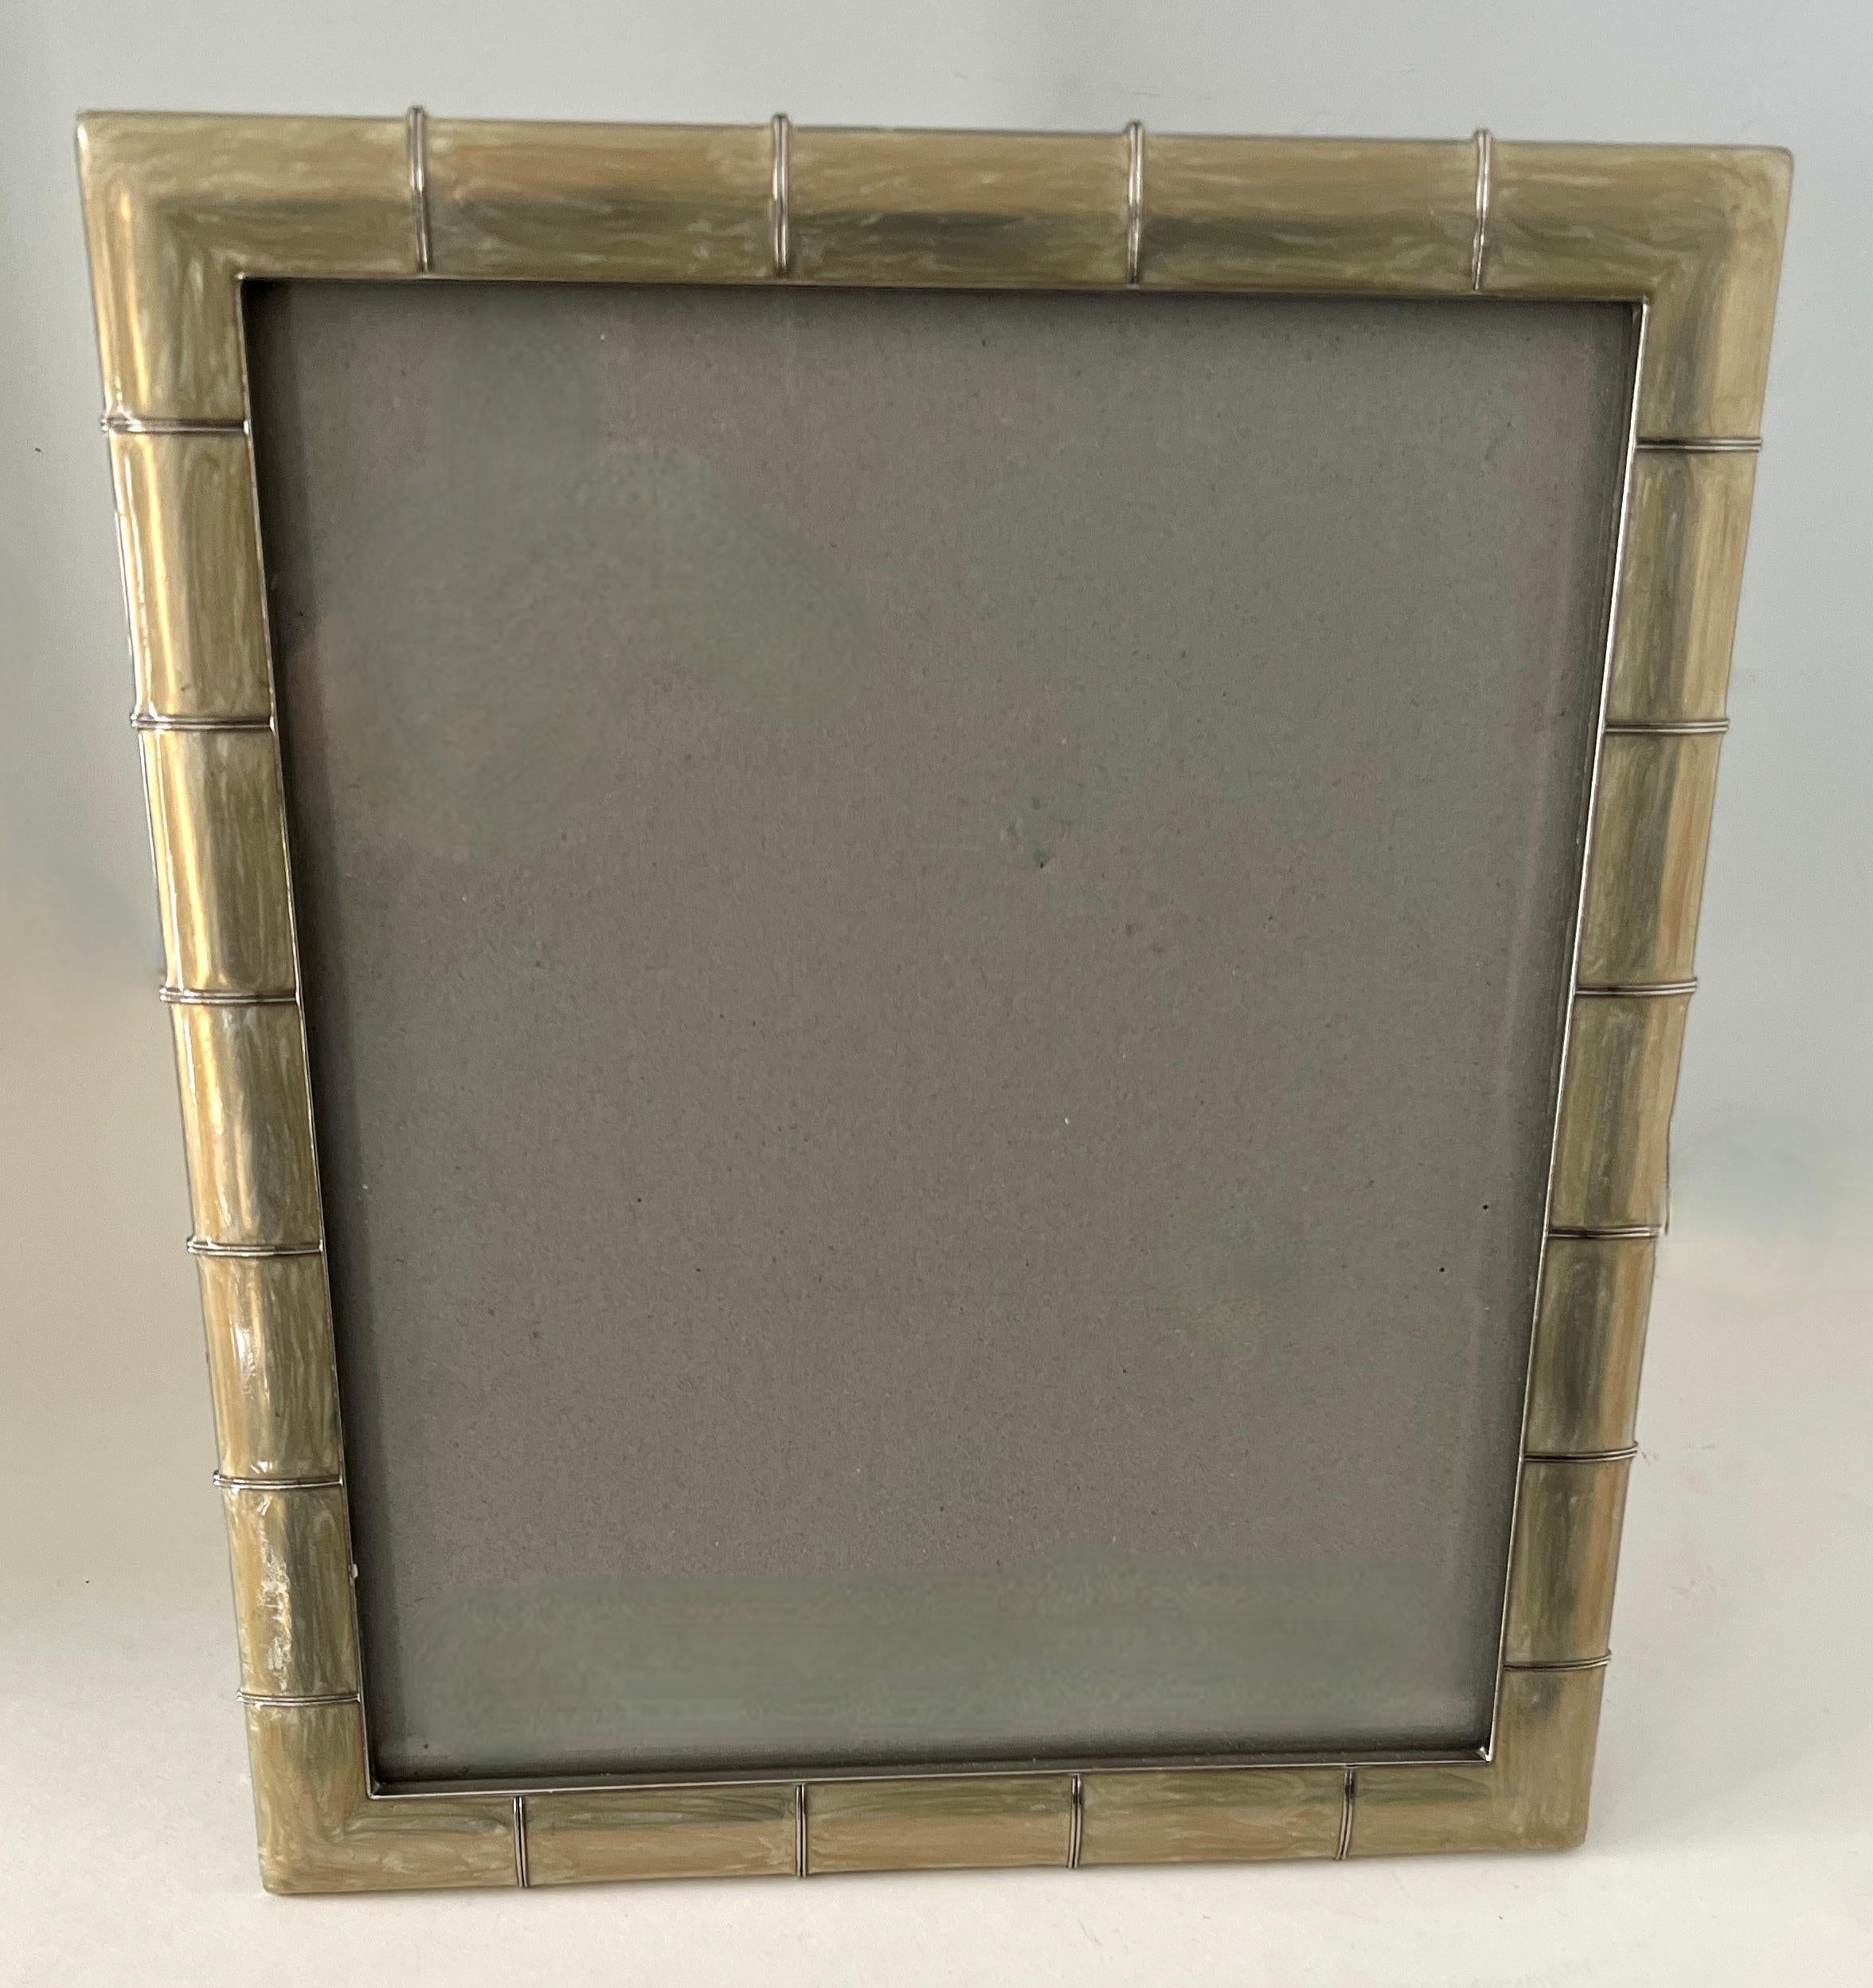 Polished Silver Iridescent Bamboo Style 8 x 10 Picture Frame For Sale